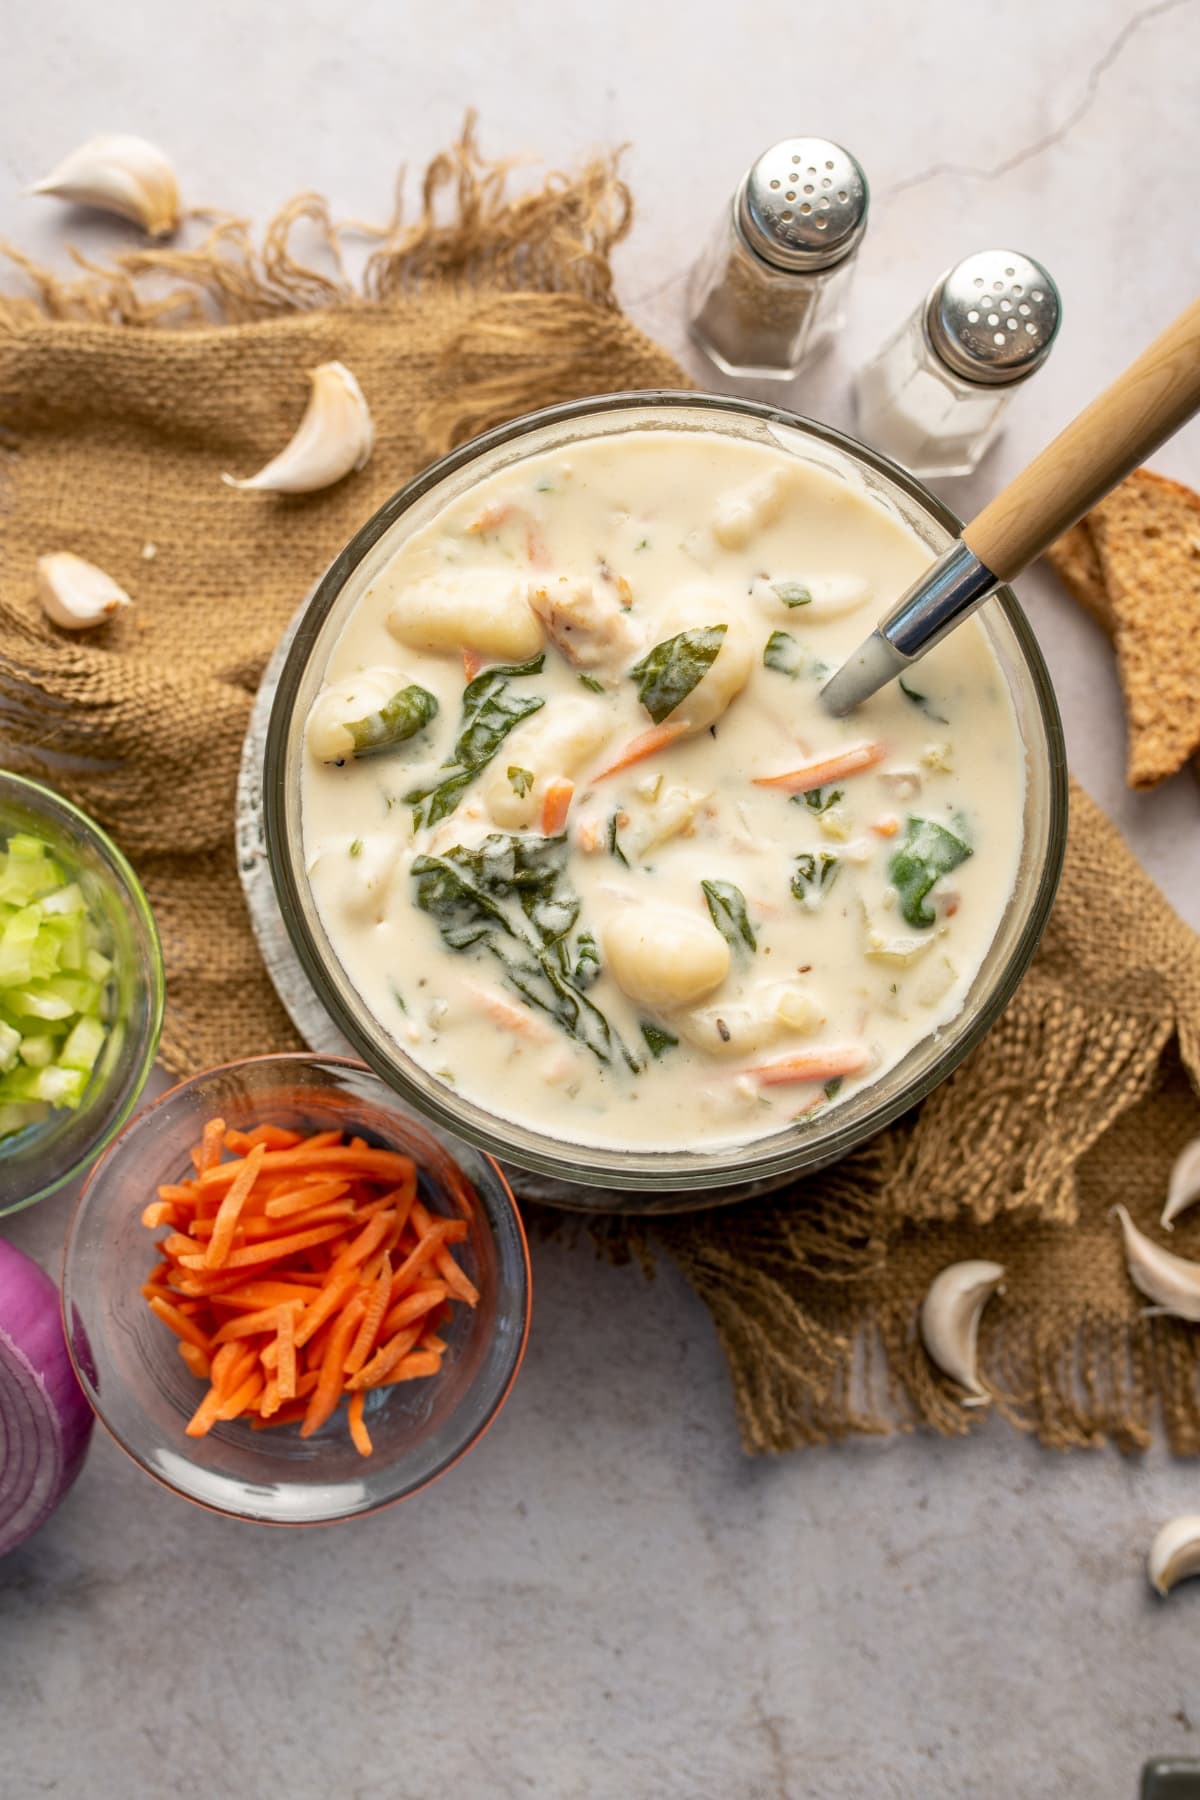 Olive Garden Chicken and Gnocchi Soup (Copycat) featuring Chicken and Gnocchi Soup with Veggies in a Bowl with a Spoon on Top of Burlap Cloth with Ingredients All Around